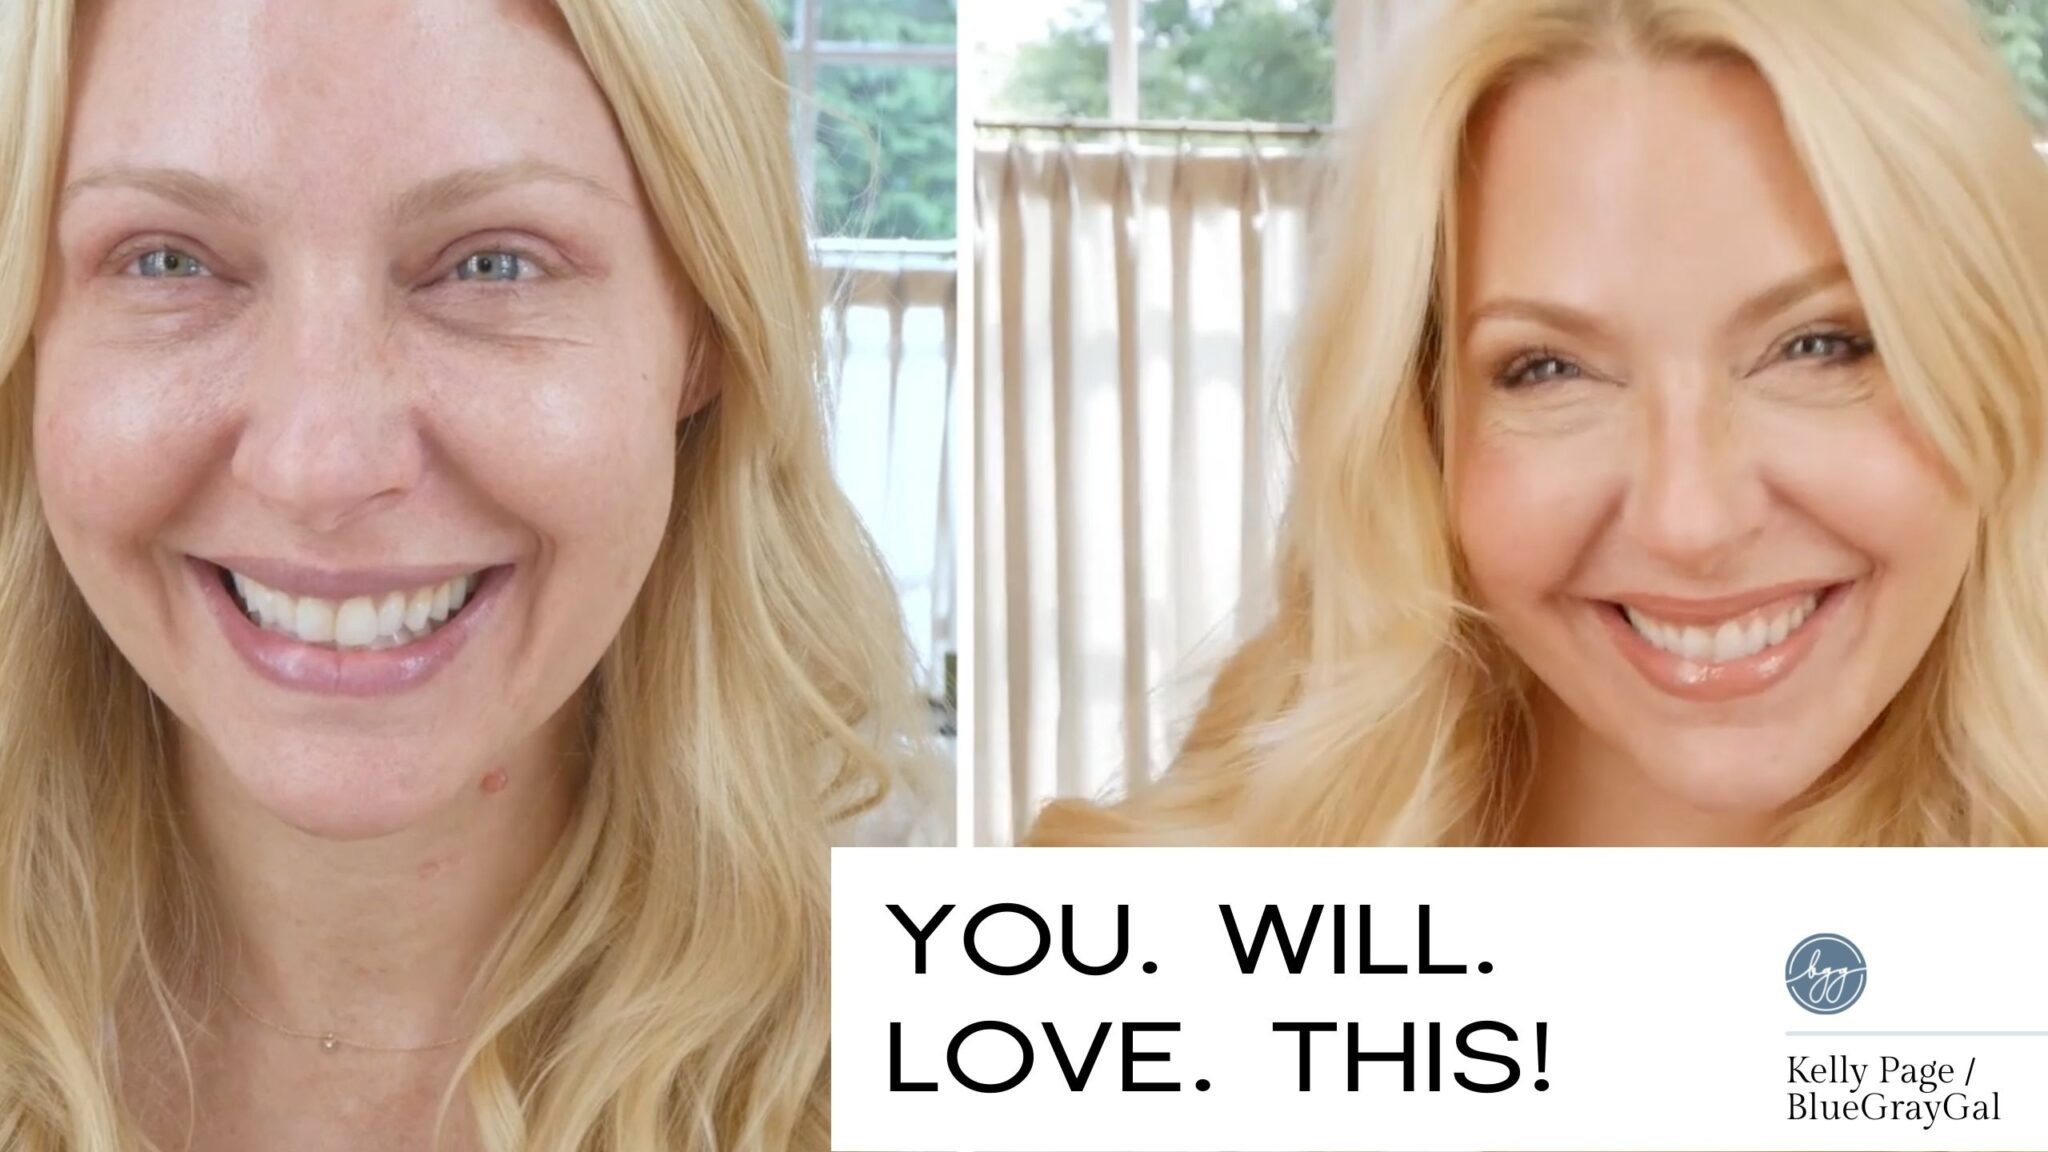 Perricone MD Tinted Moisturizer Review with Atlanta influencer Kelly Page for BlueGrayGal.